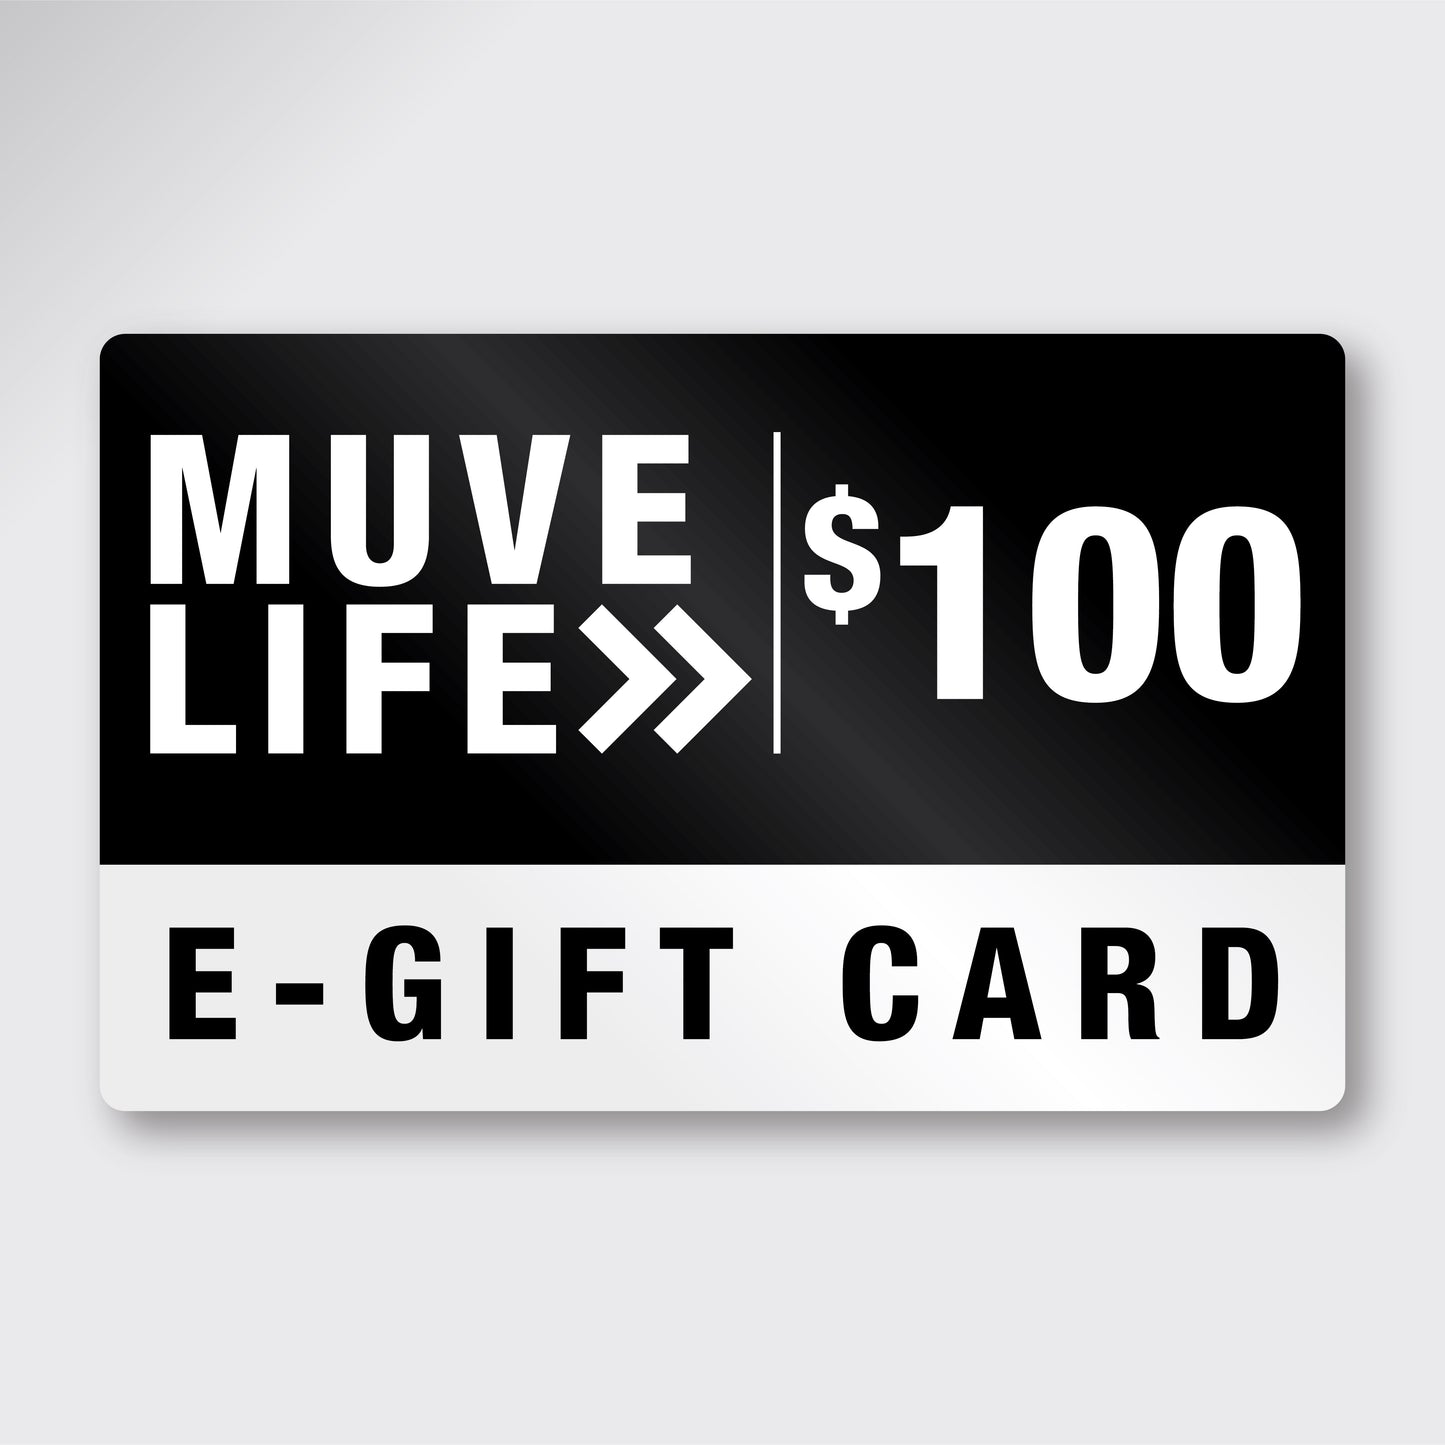 MUVE LIFE GIFT CARD